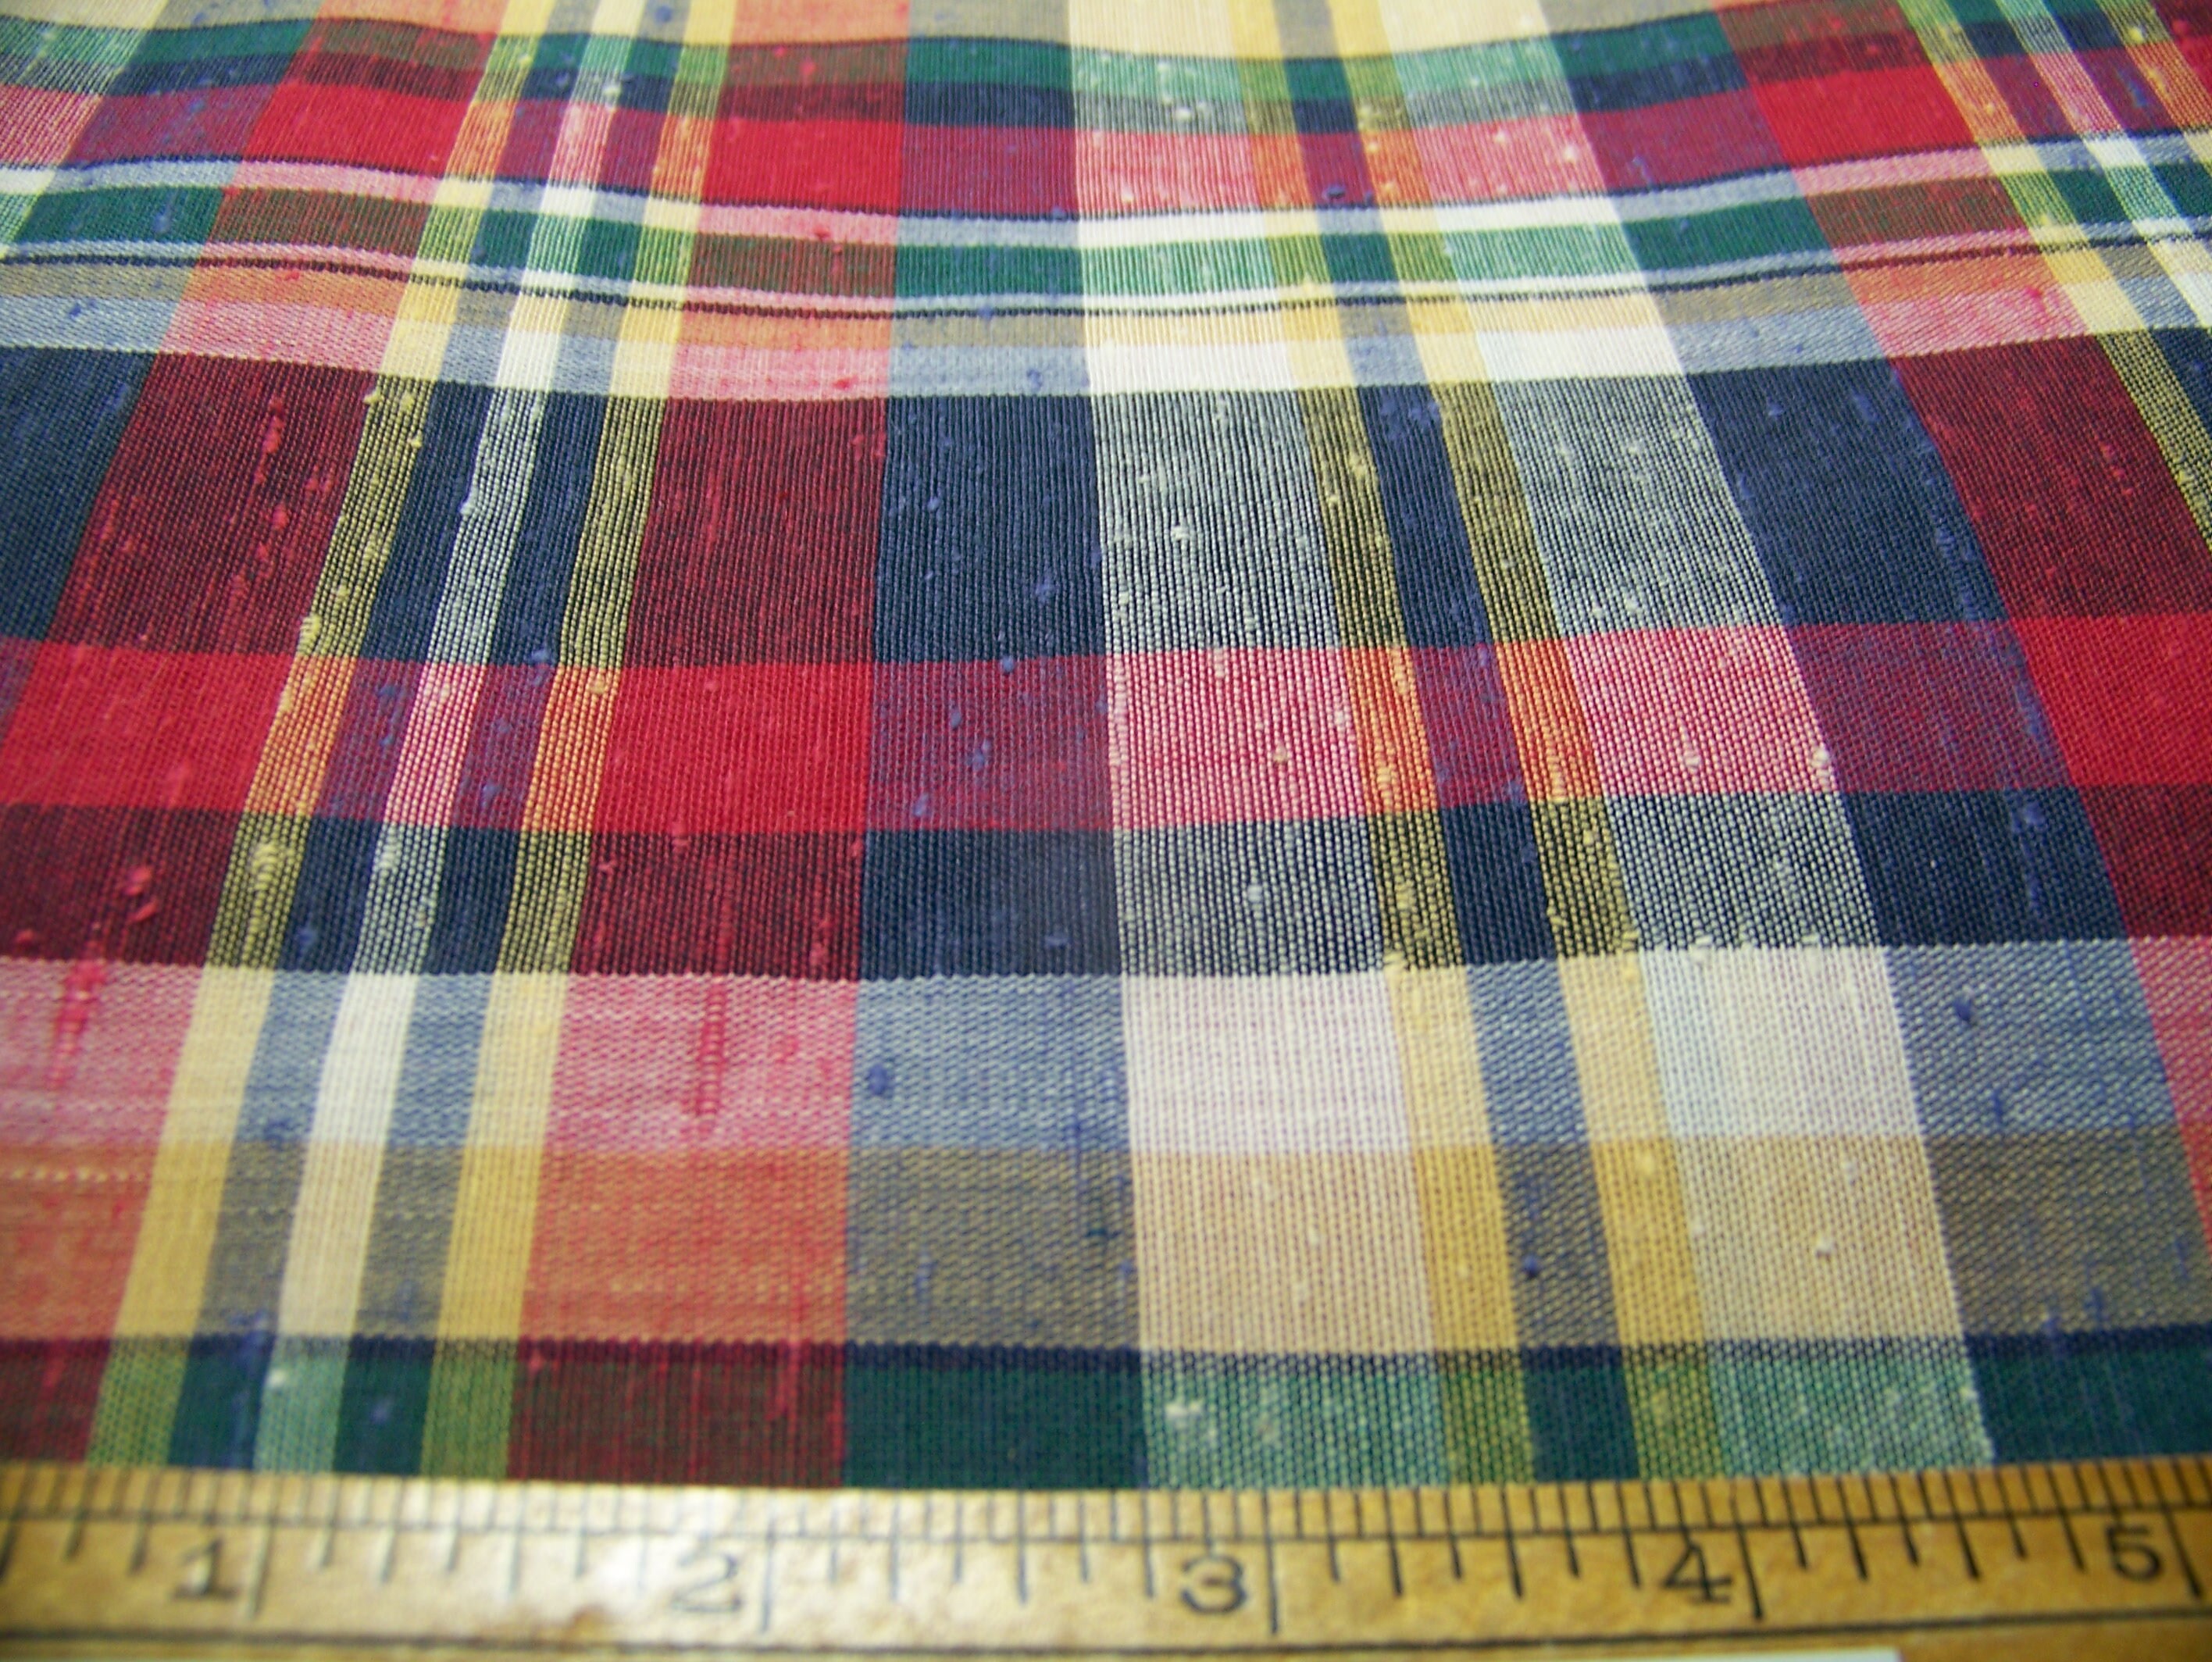 Vintage 1970's Blended Cotton Fabric Reversible Nubby Plaid Red Yellow Navy Green White 44 Wide 36 Long Quilt Doll Clothes Invbgs"